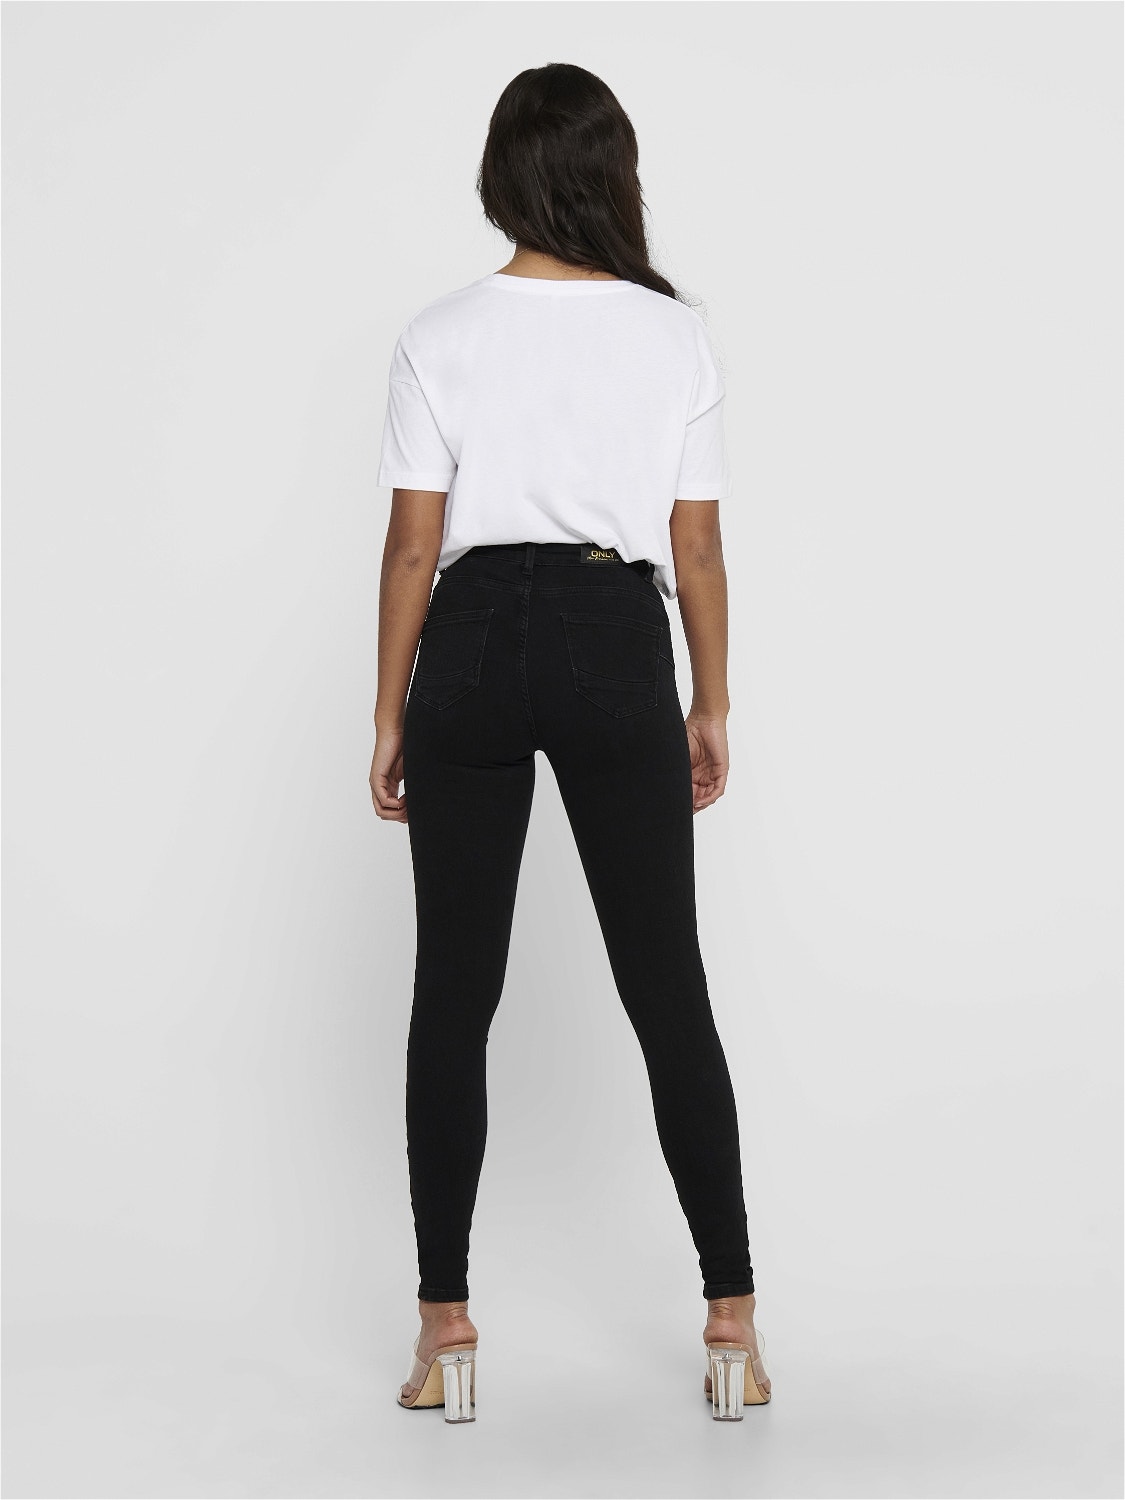 ONLY ONLPower mid push up Skinny jeans -Black - 15181958